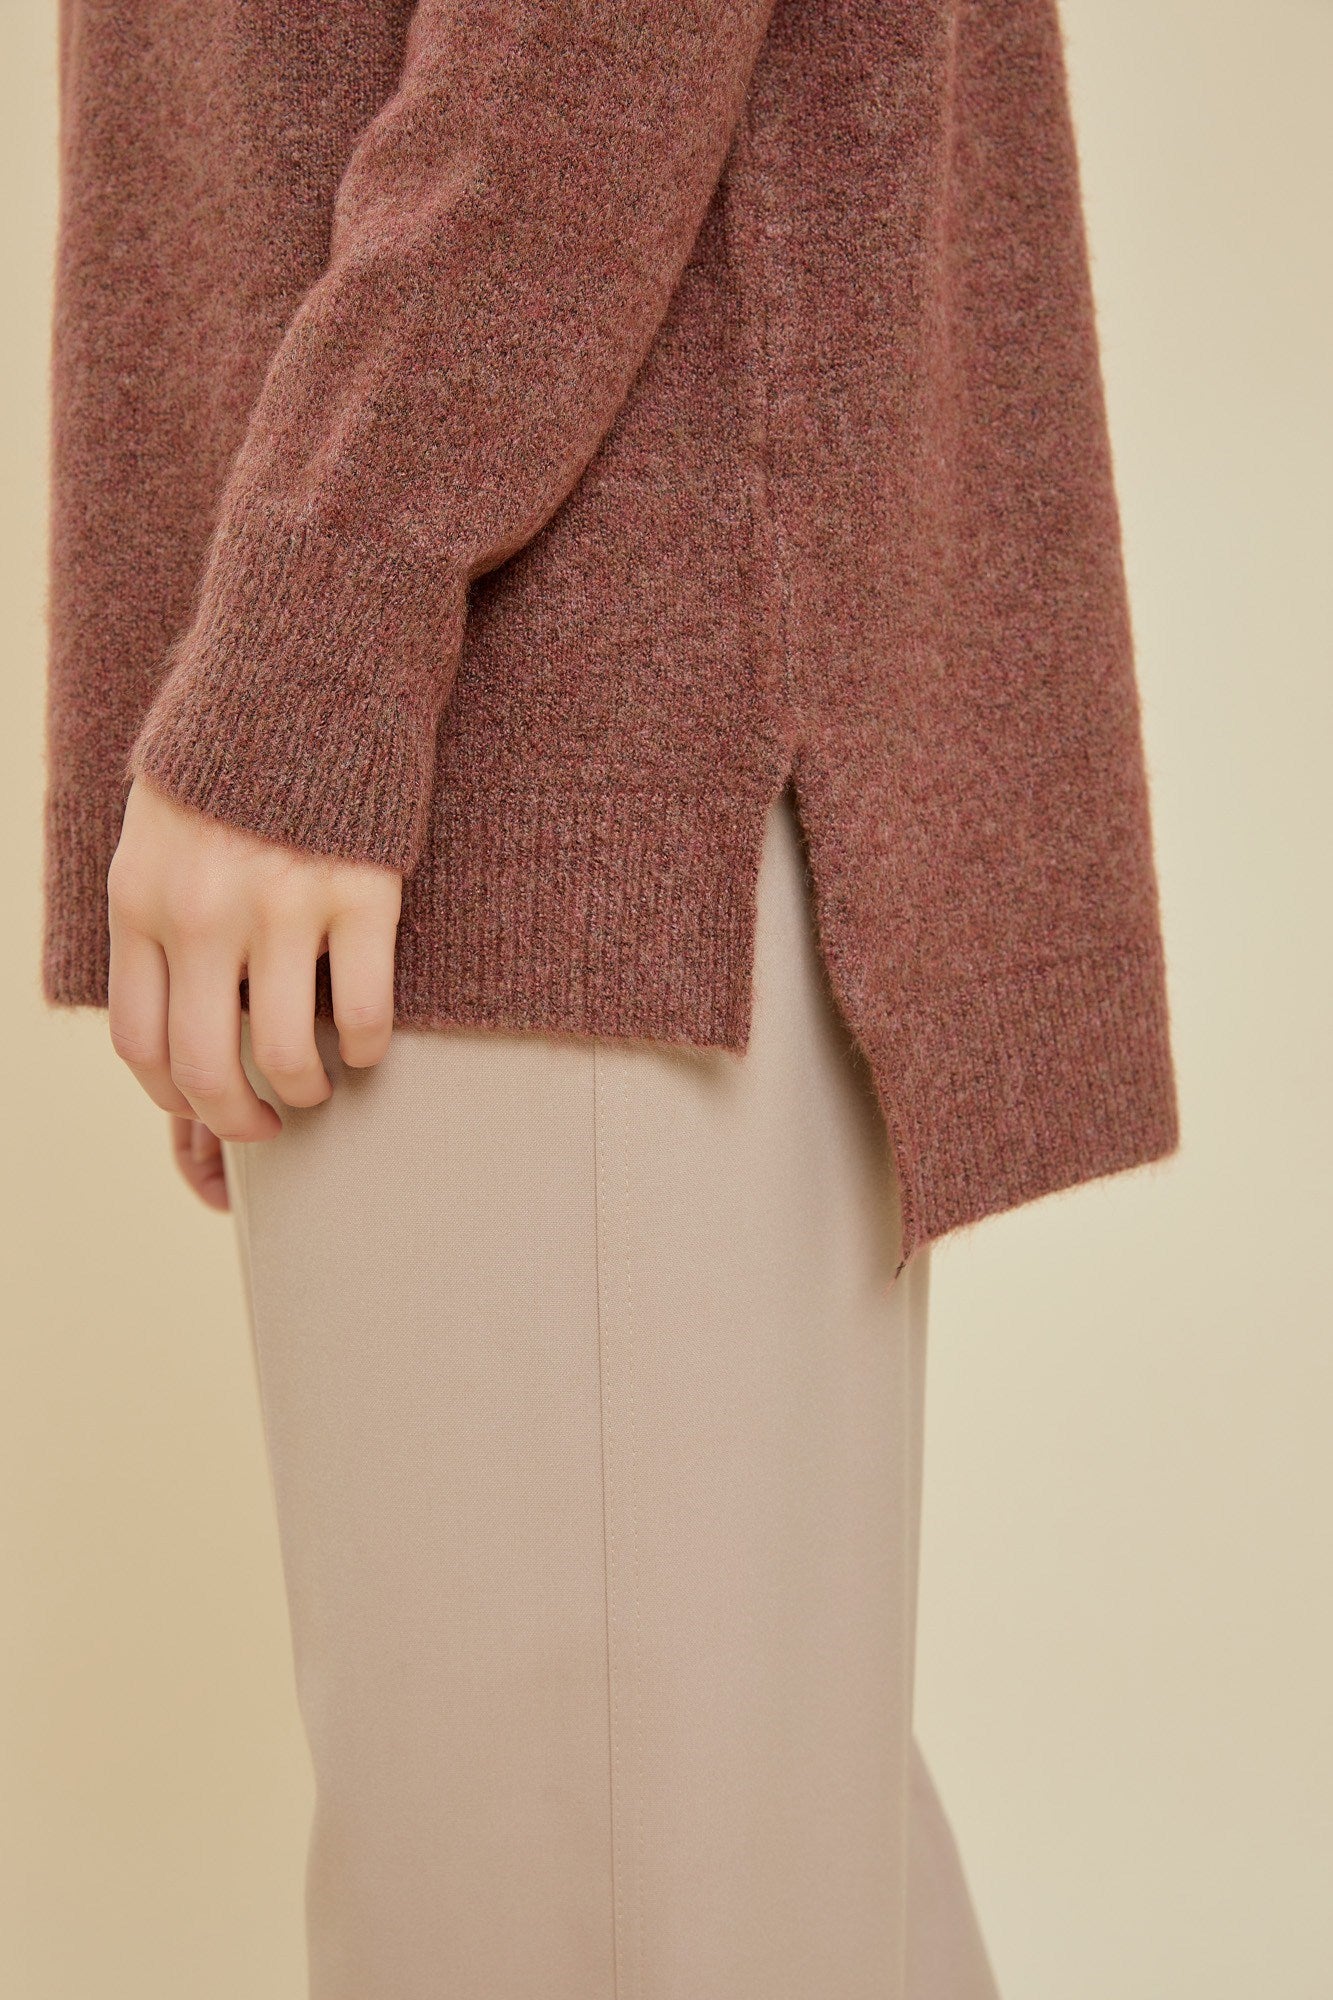 Oversize Soft V-Neck Sweater In Maroon